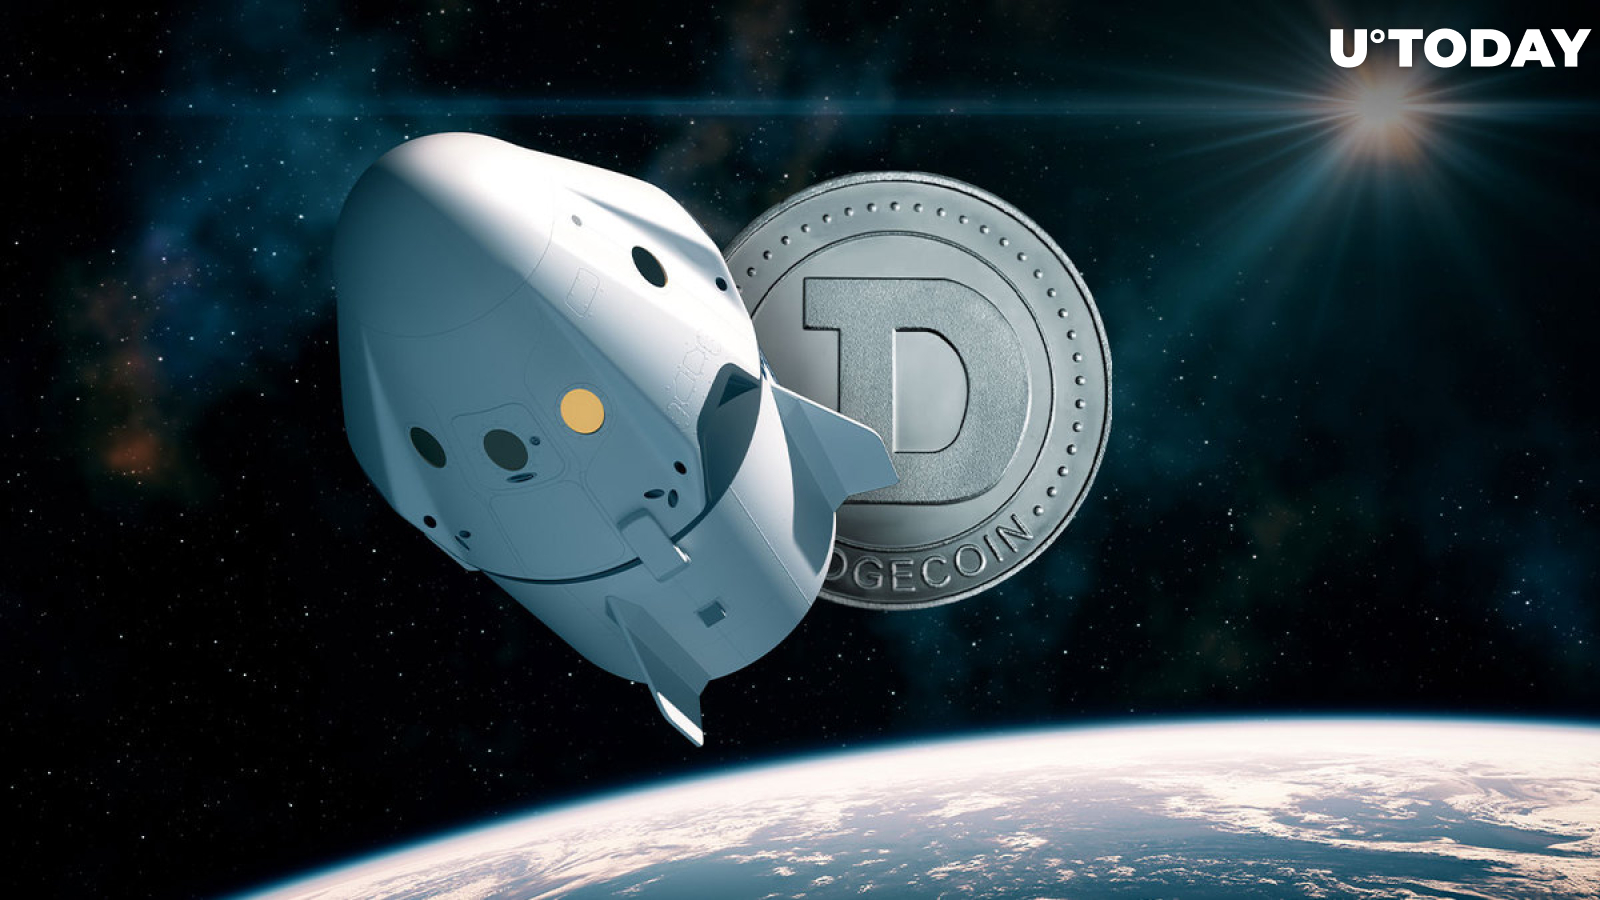 Dogecoin’s Moon Mission DOGE-1 Gets NTIA Approval